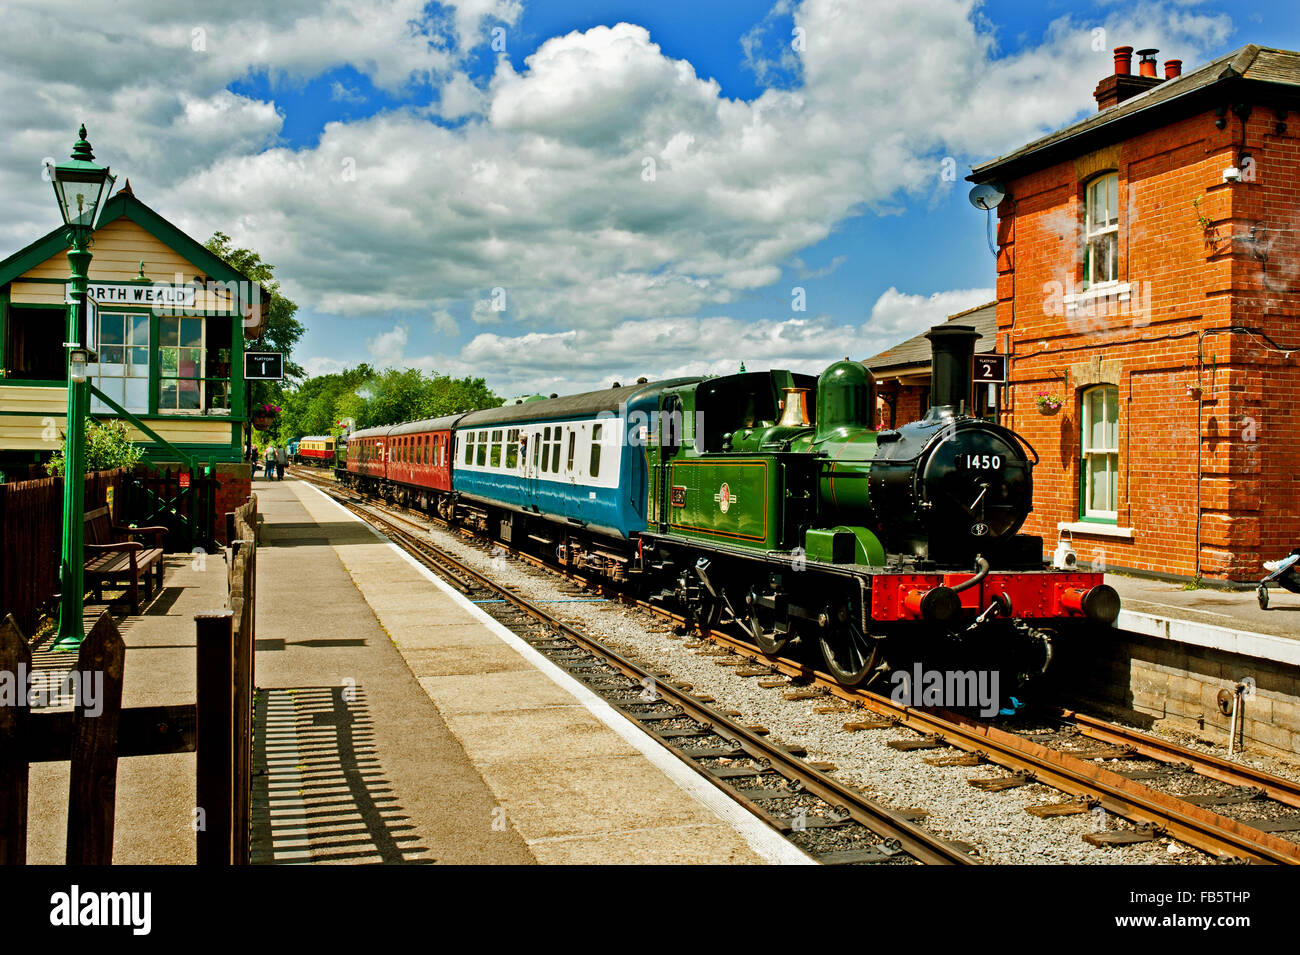 14xx class no 1450 at North Weald Station on Epping Ongar Railway in Essex Stock Photo